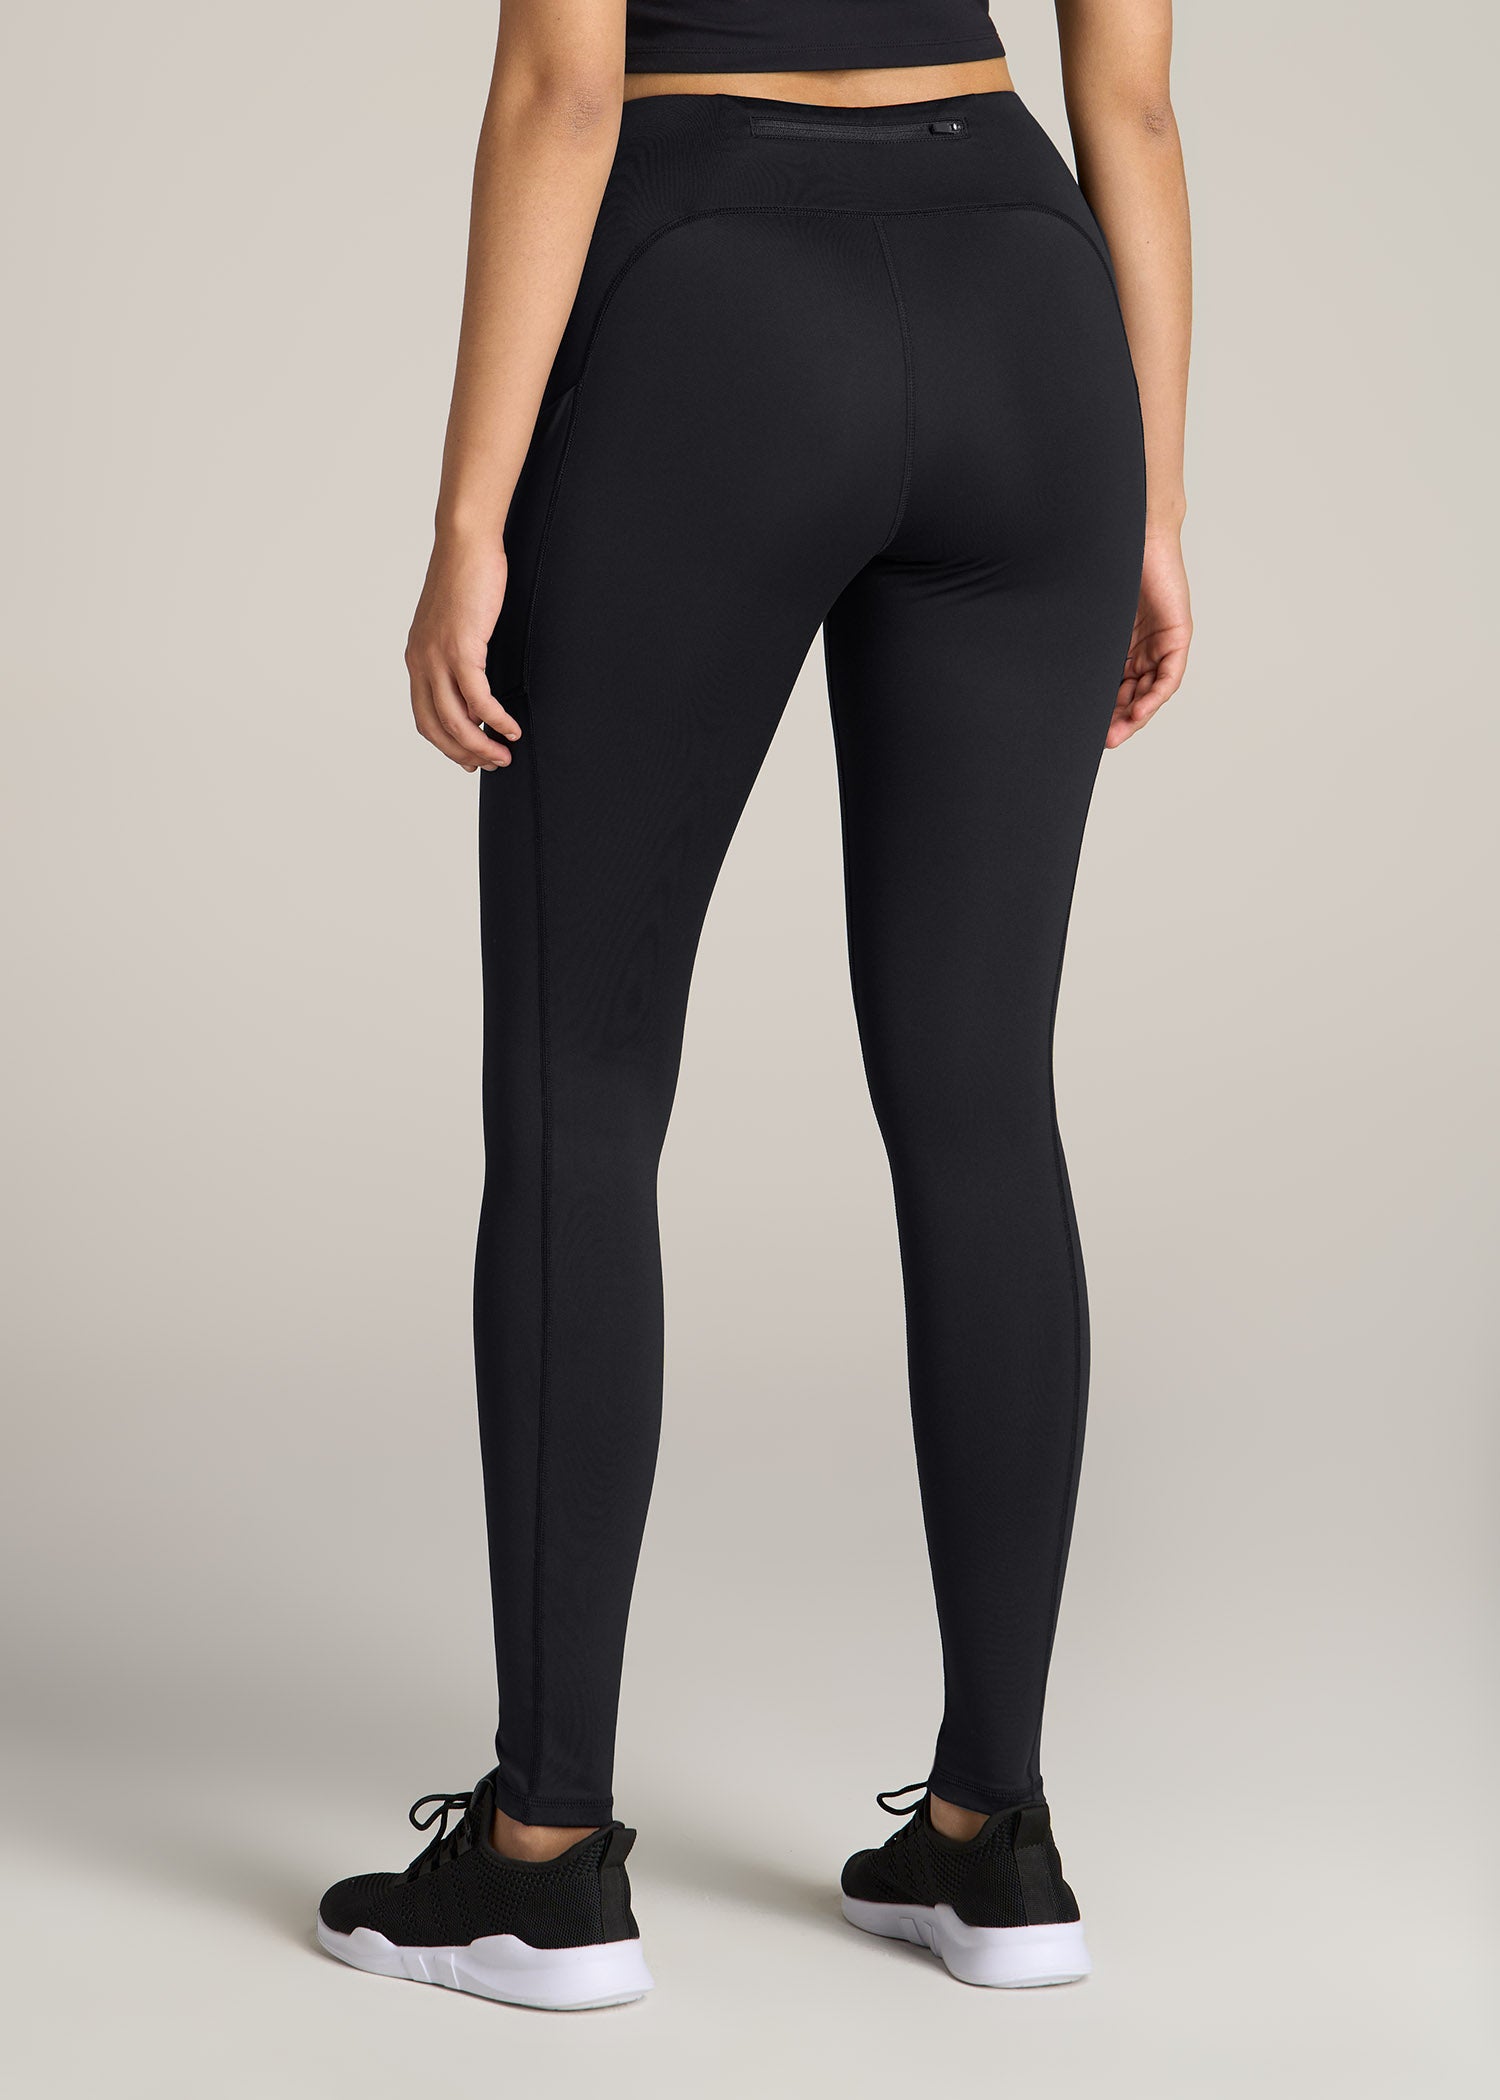 Leggings with Front Pockets